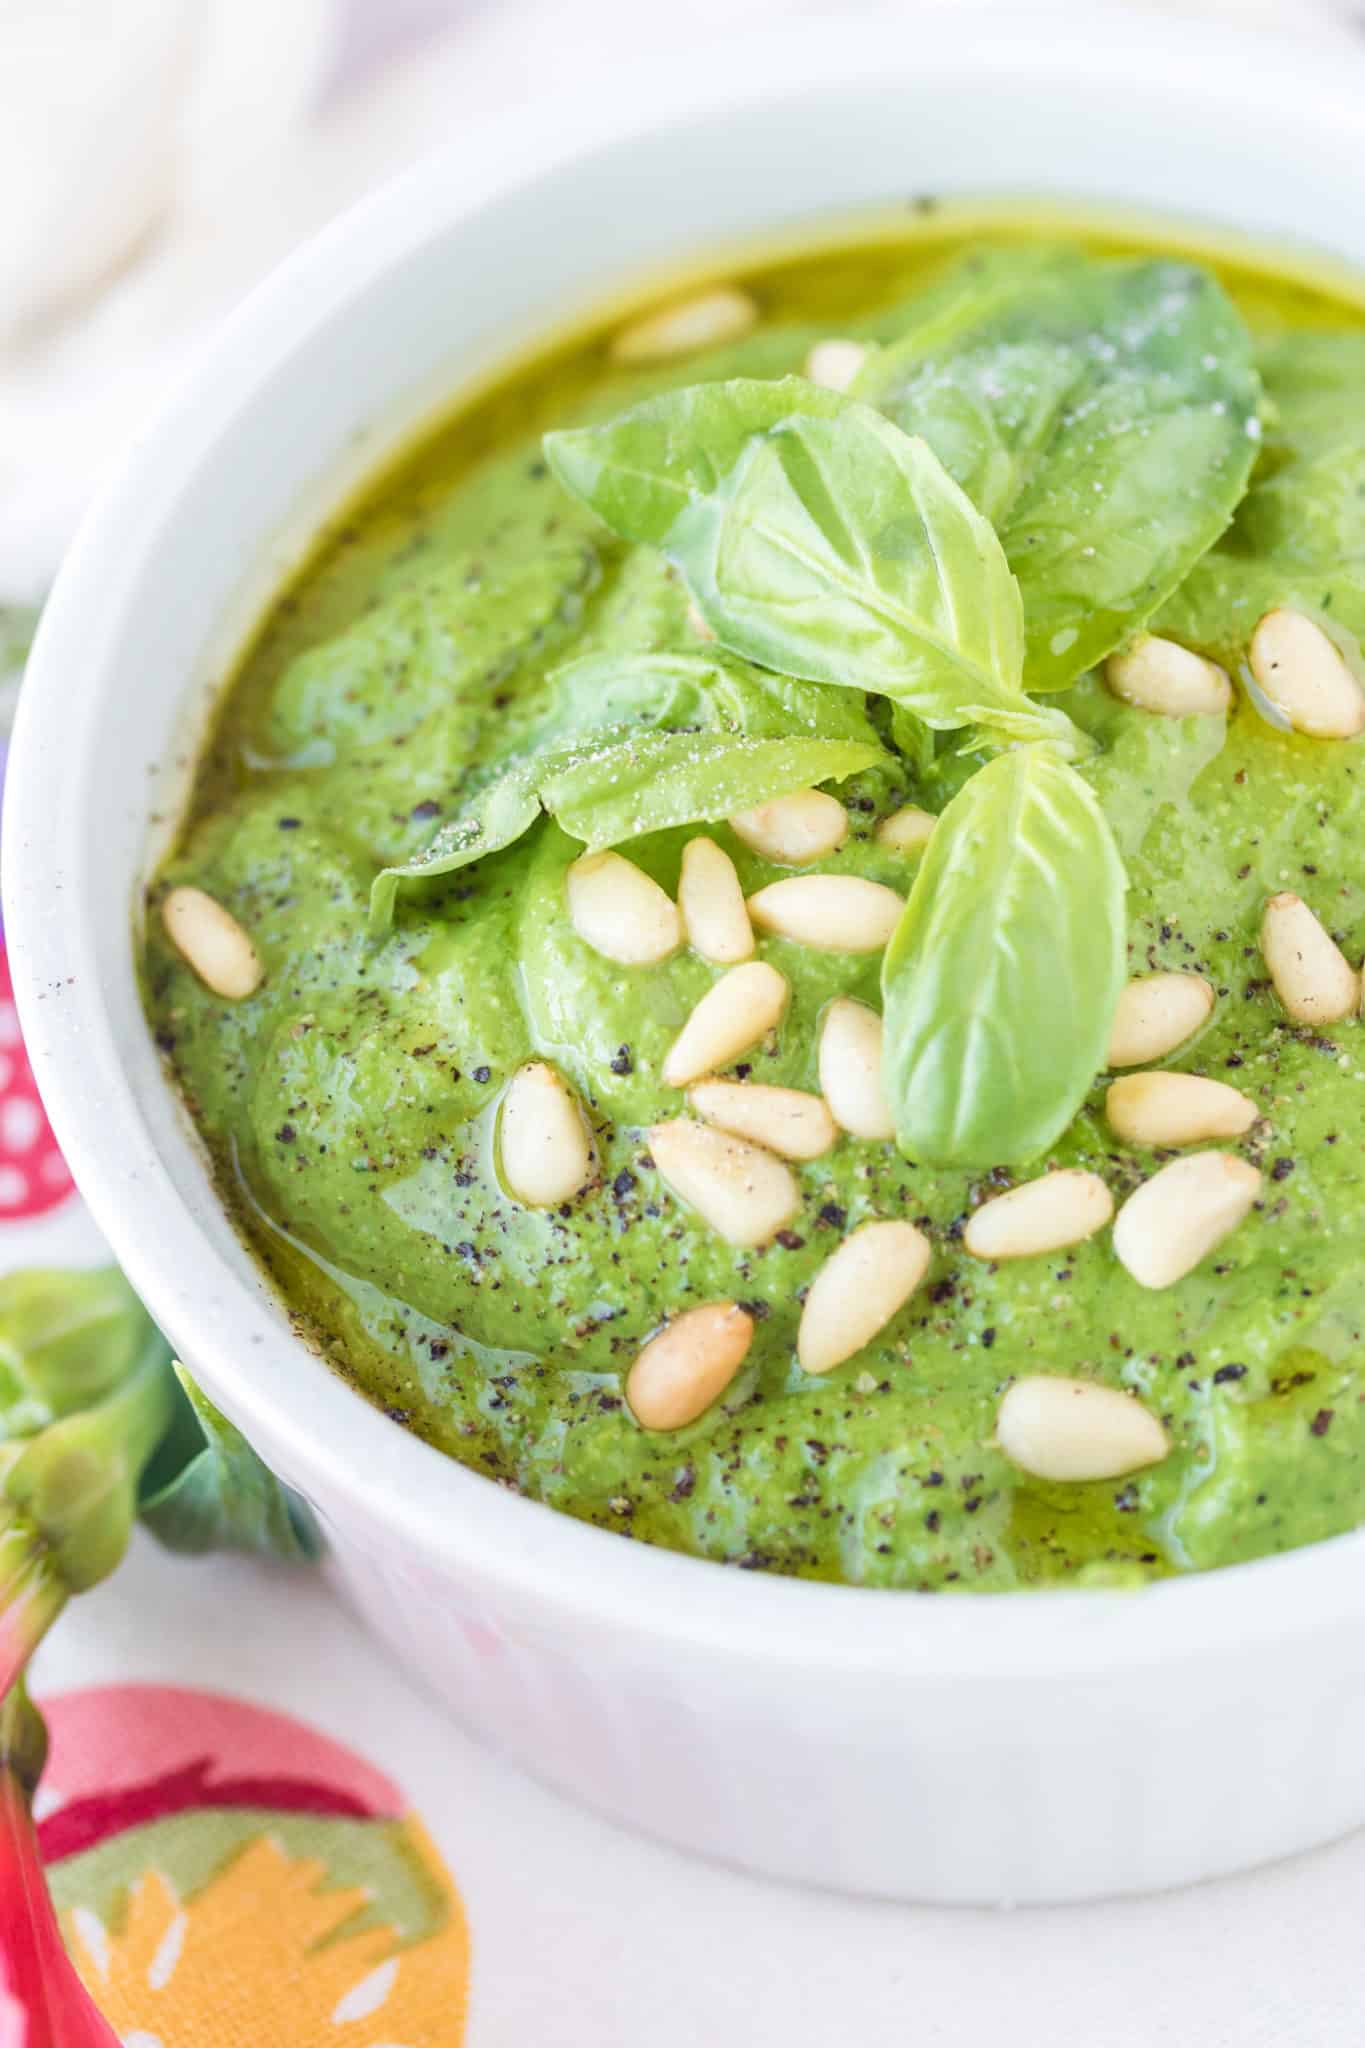 pesto served in a bowl topped with pine nuts and basil leaves